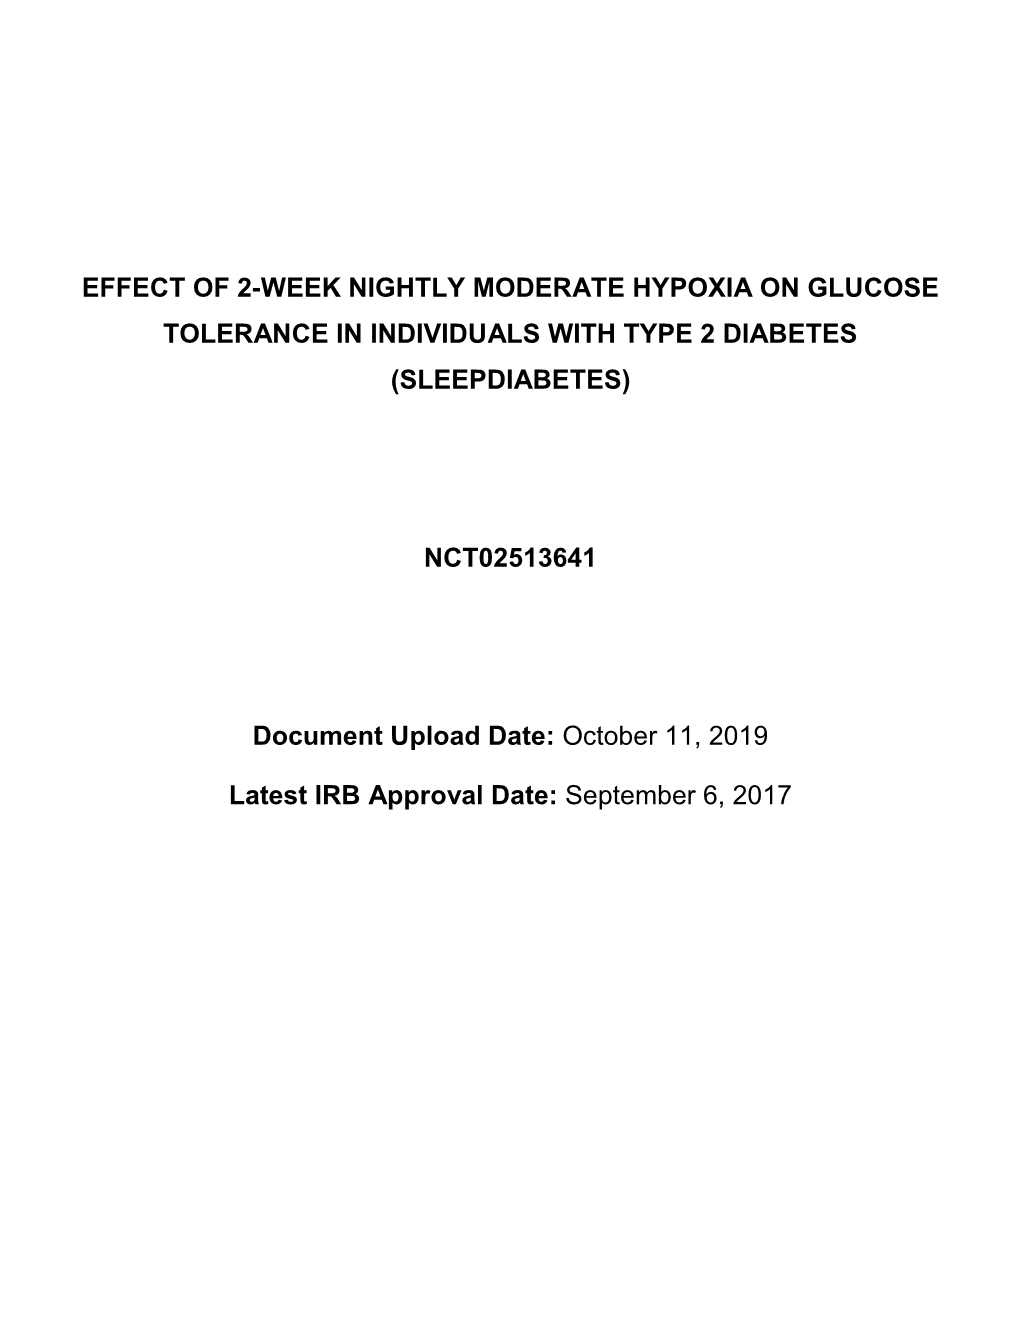 Effect of 2-Week Nightly Moderate Hypoxia on Glucose Tolerance in Individuals with Type 2 Diabetes (Sleepdiabetes)